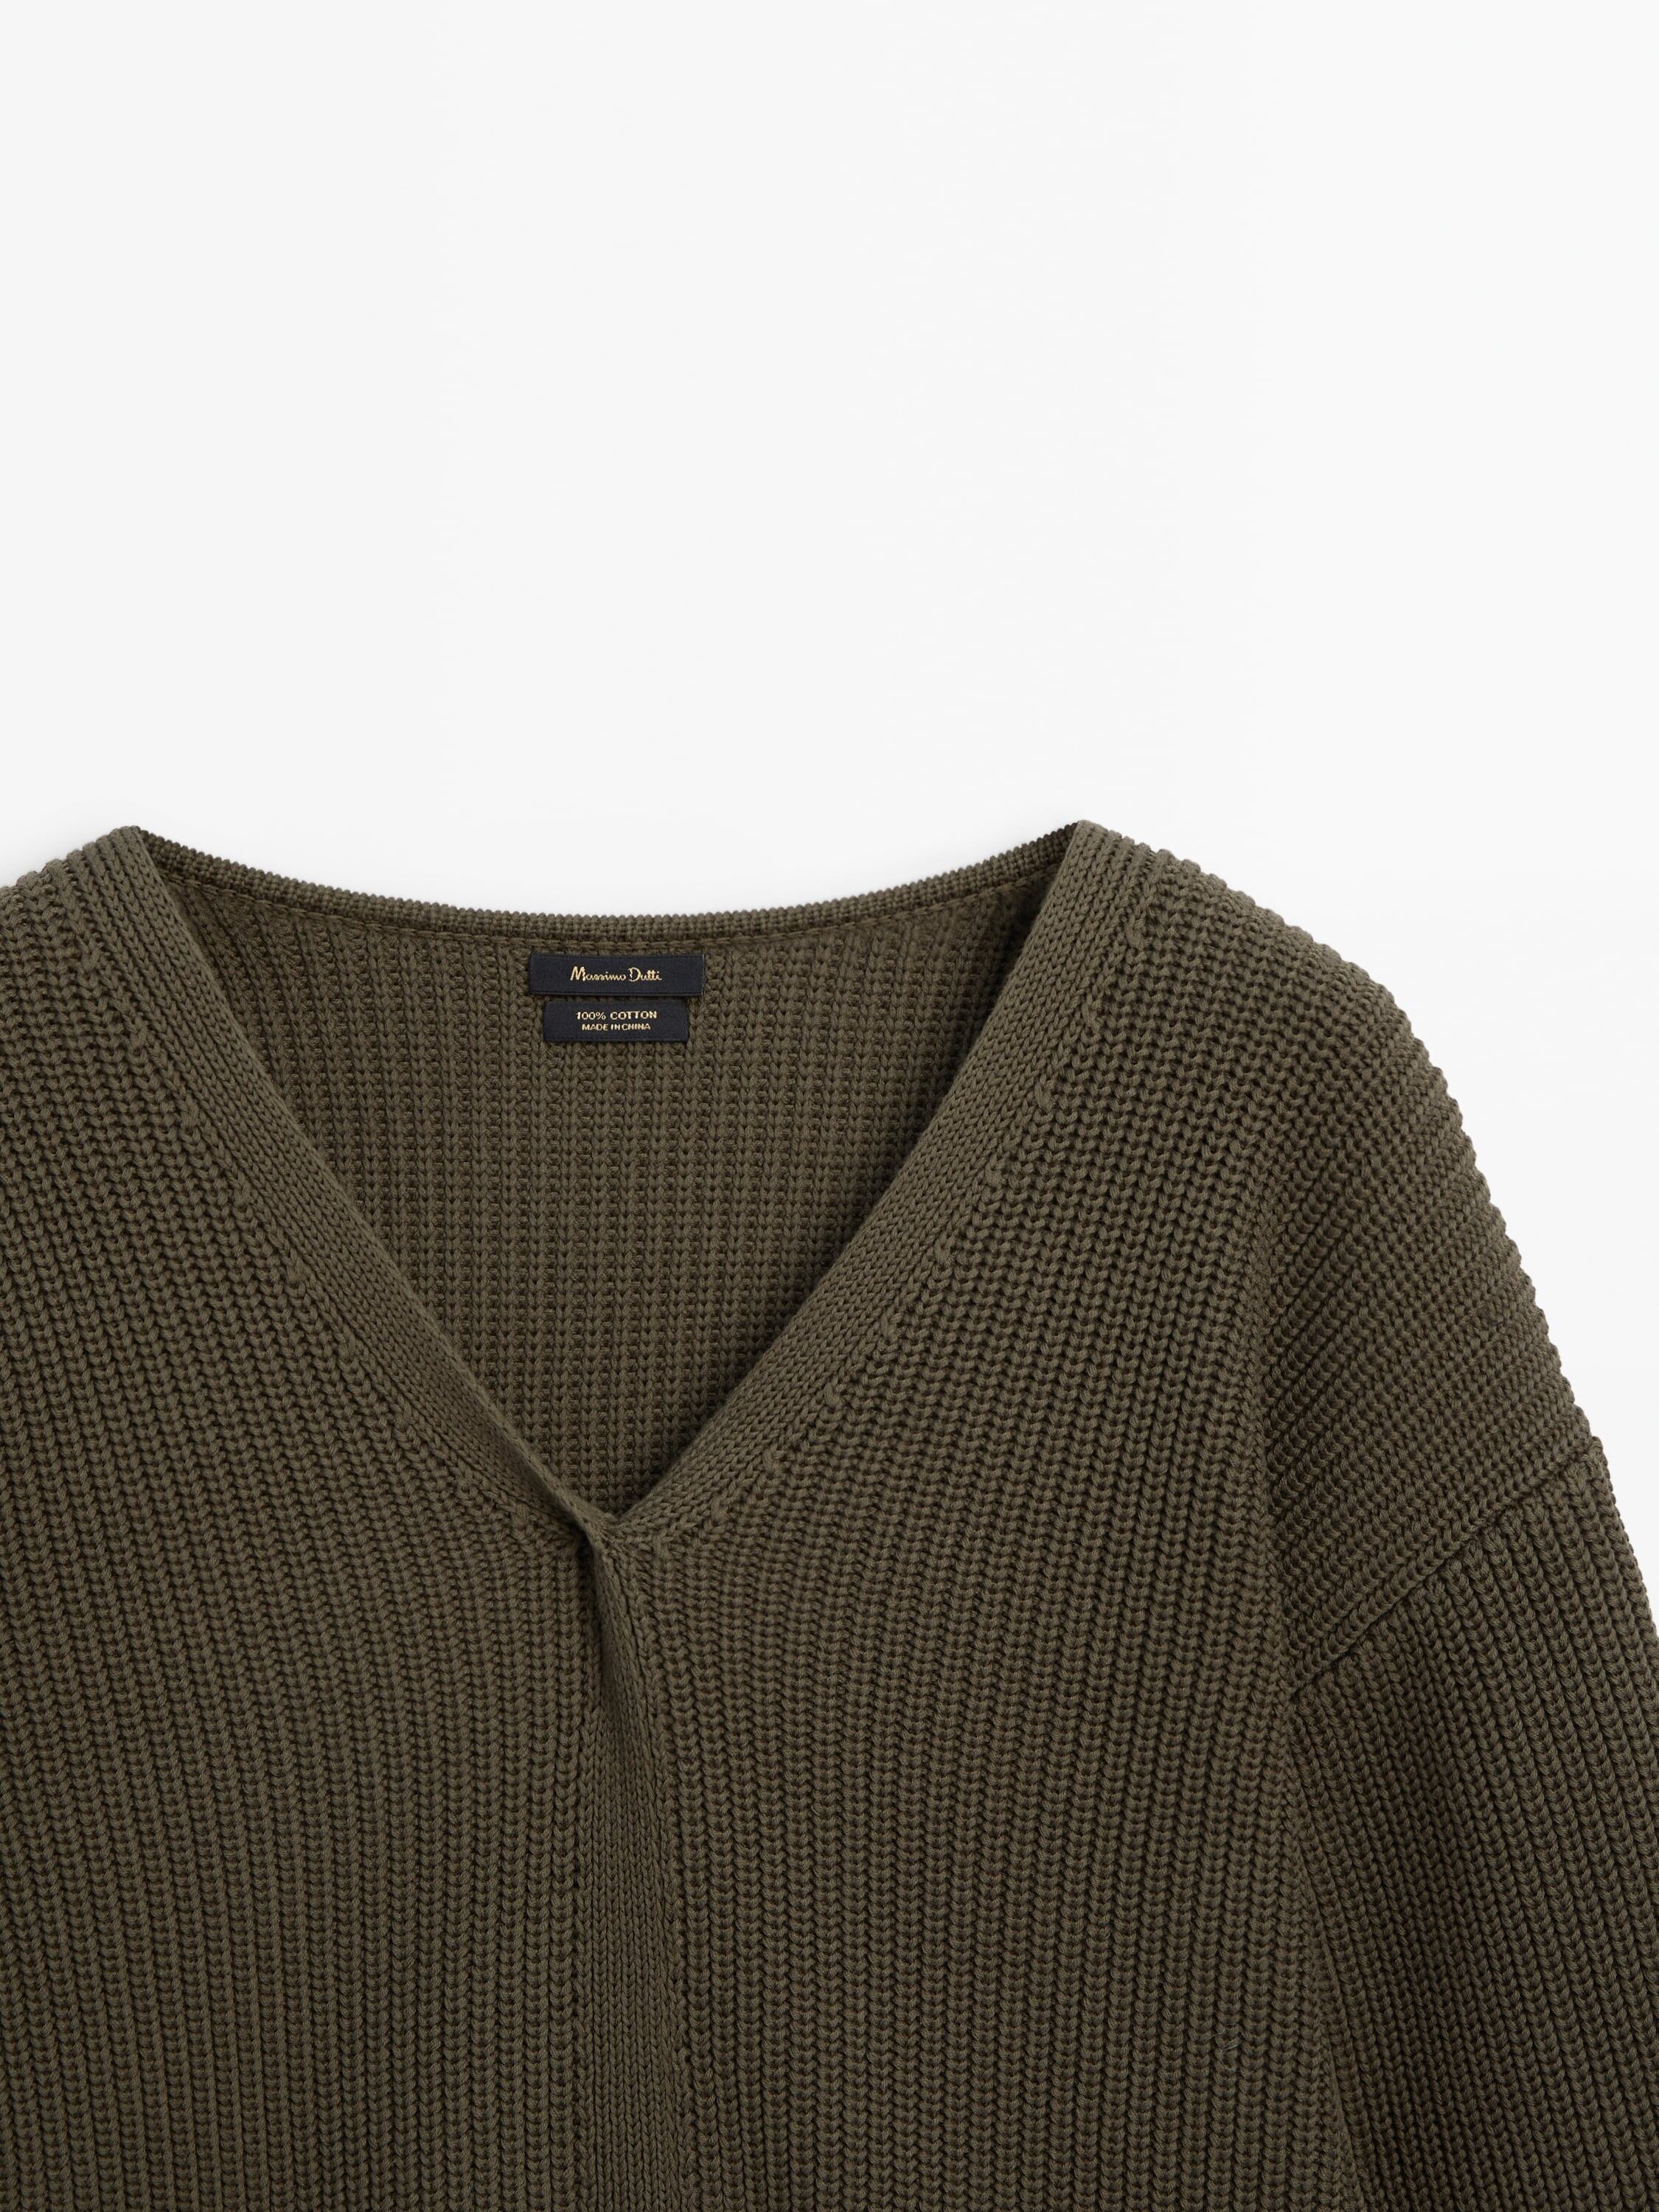 Purl knit V-neck sweater with front detail